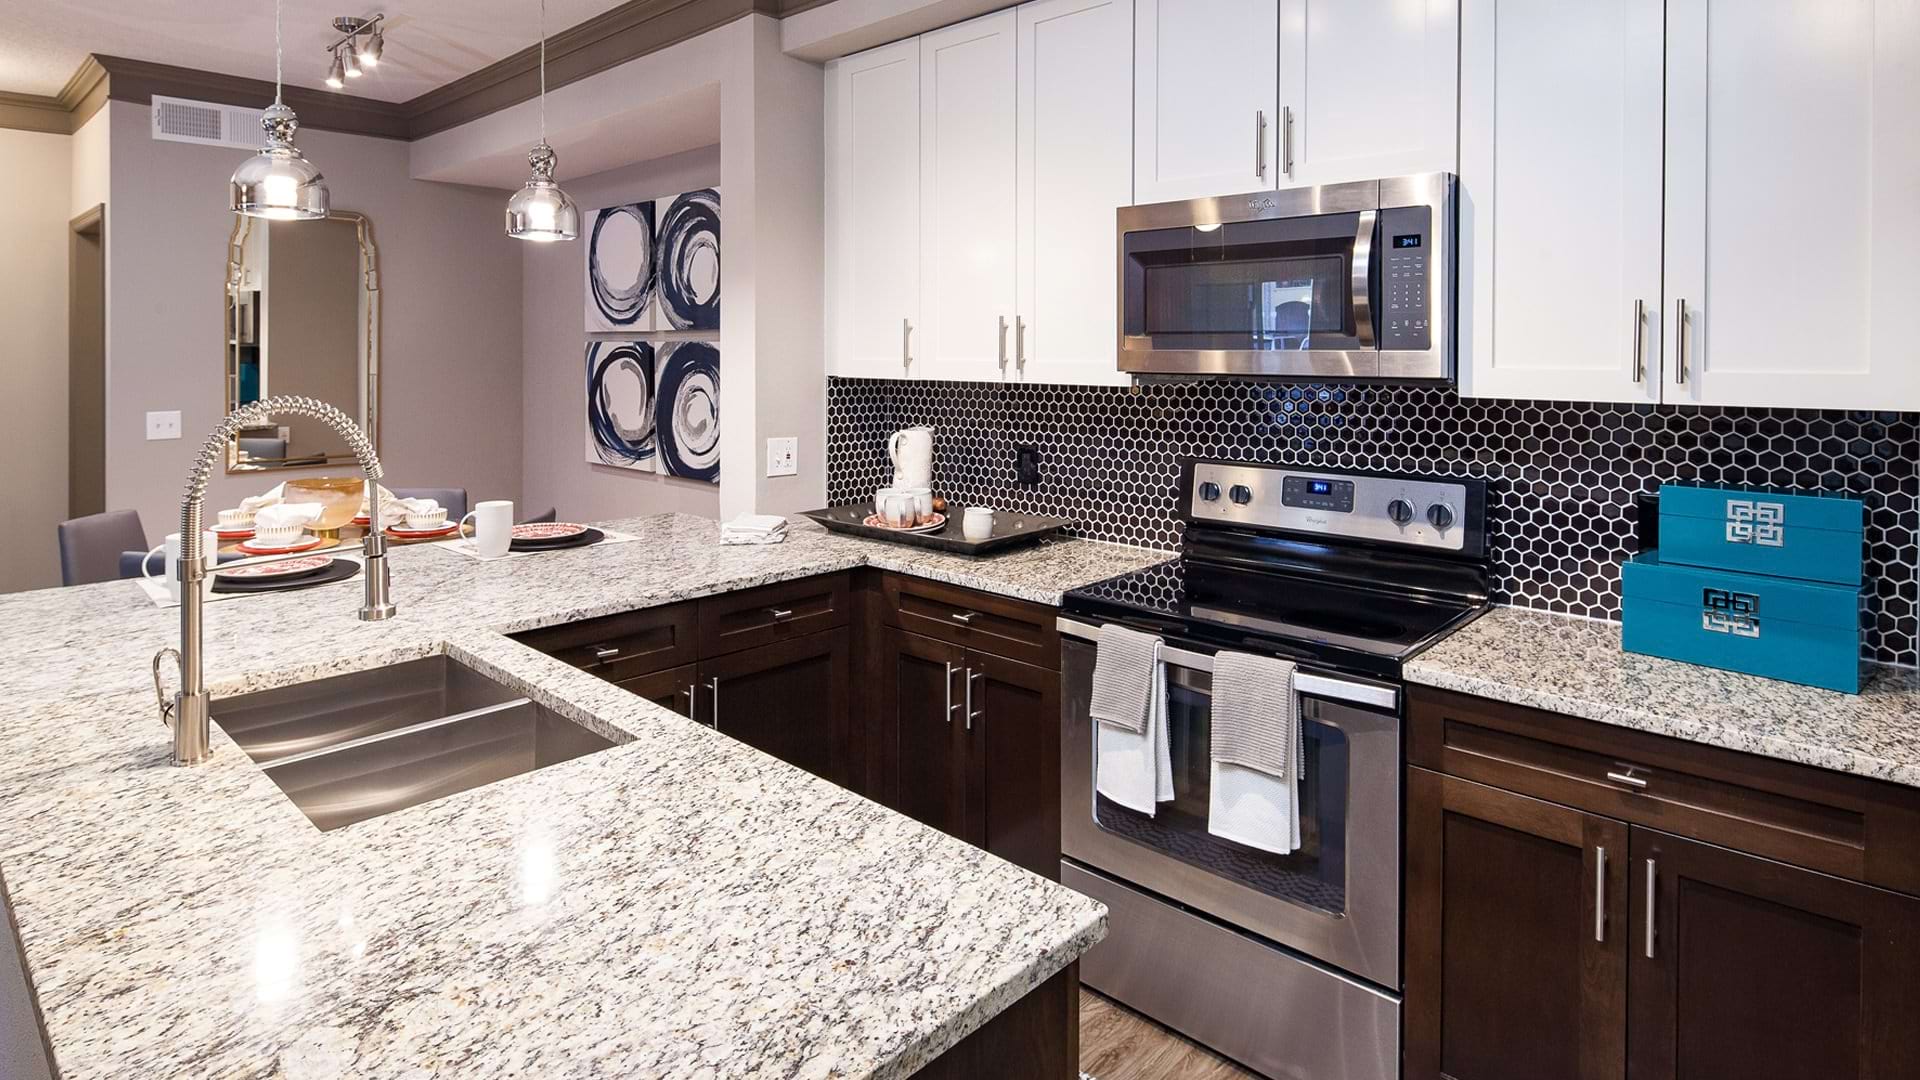 Upscale Kitchen with Stainless Steel Appliances and Granite Countertops at Our Apartments Near Seminole State College